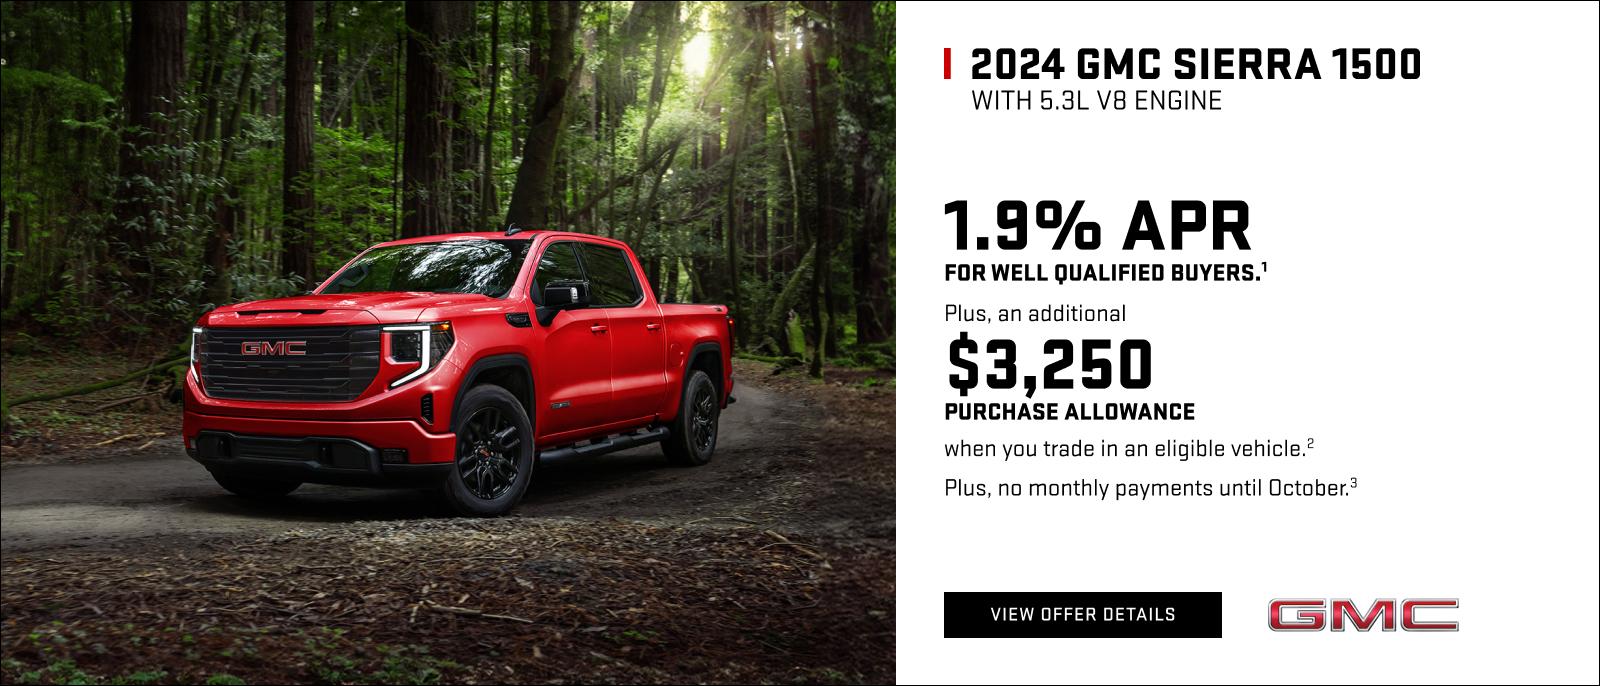 1.9% APR for well-qualified buyers.1

Plus, an additional $3,250 PURCHASE ALLOWANCE when you trade in an eligible vehicle.2

Plus, no monthly payments until October. 3